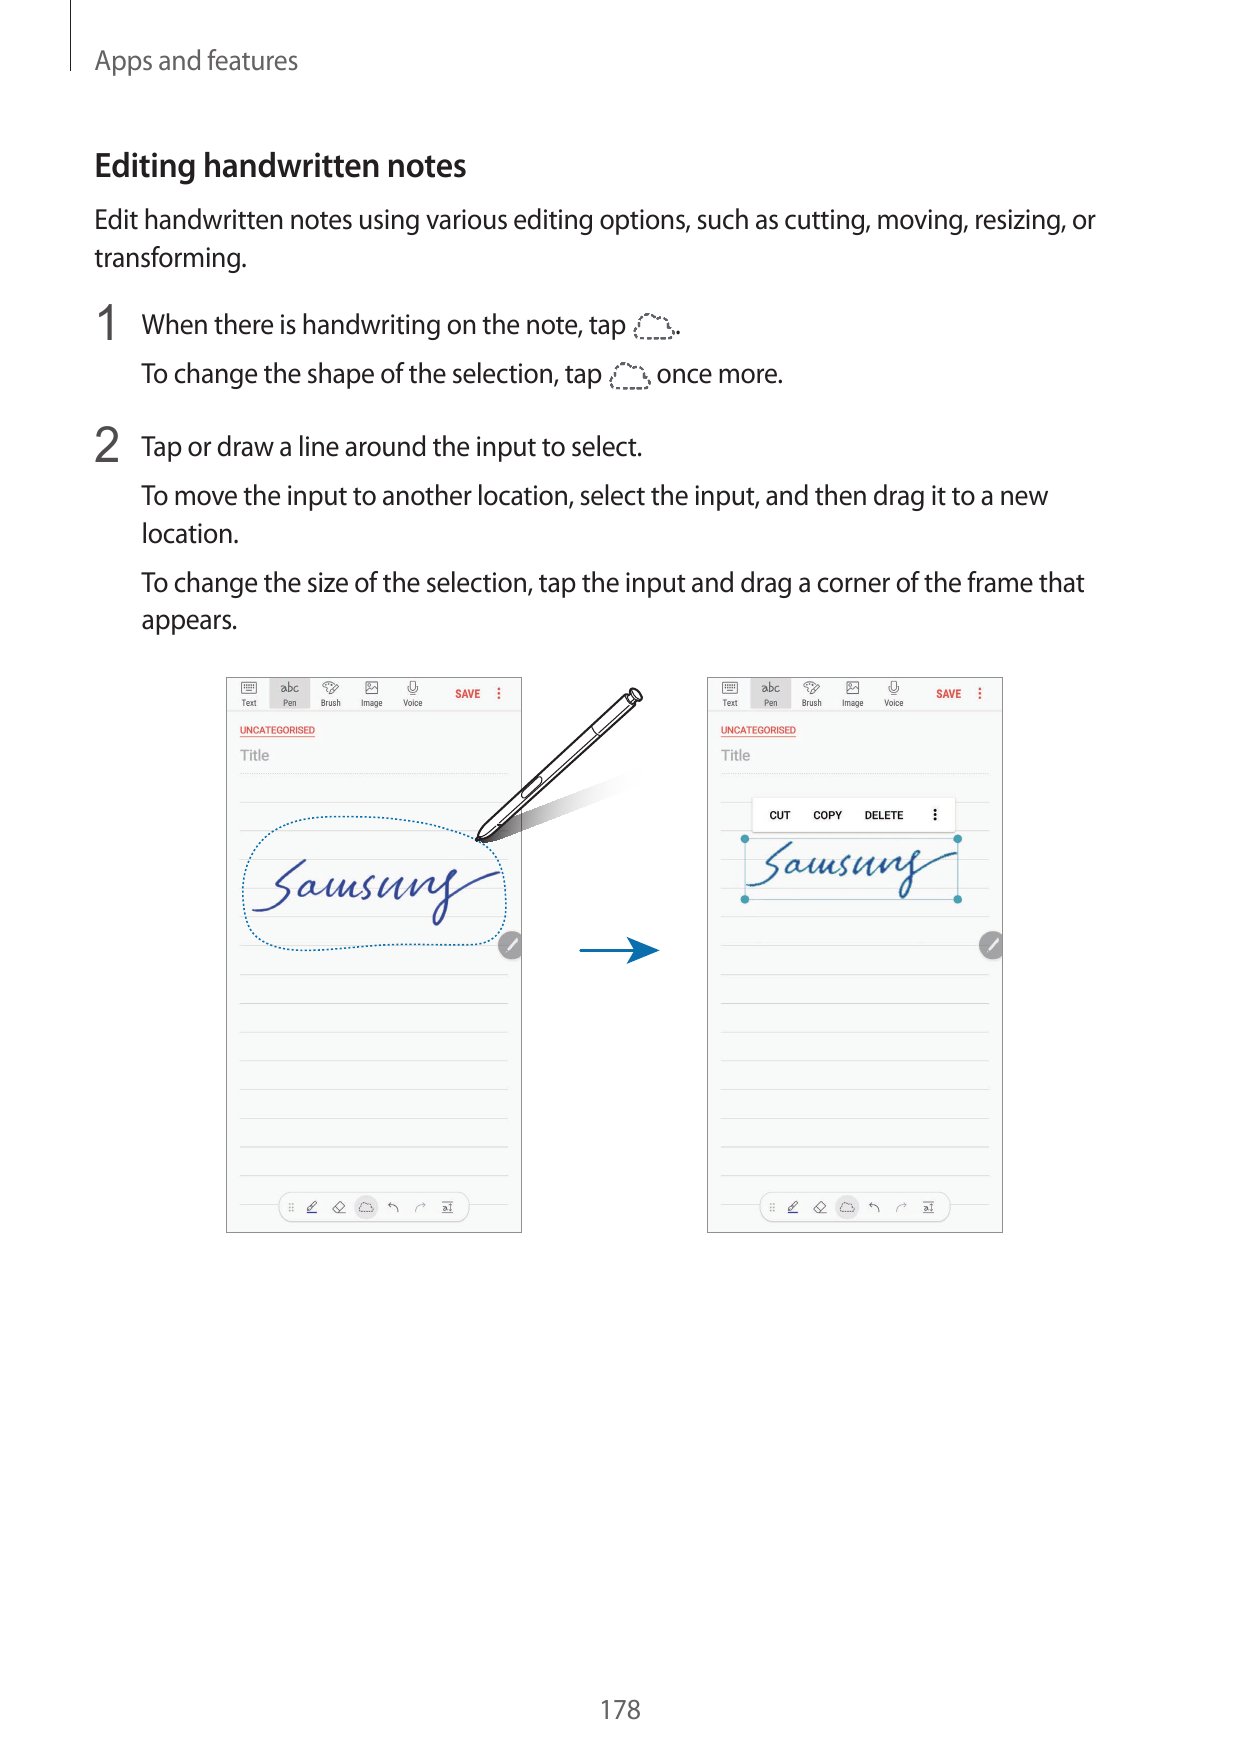 Apps and featuresEditing handwritten notesEdit handwritten notes using various editing options, such as cutting, moving, resizin